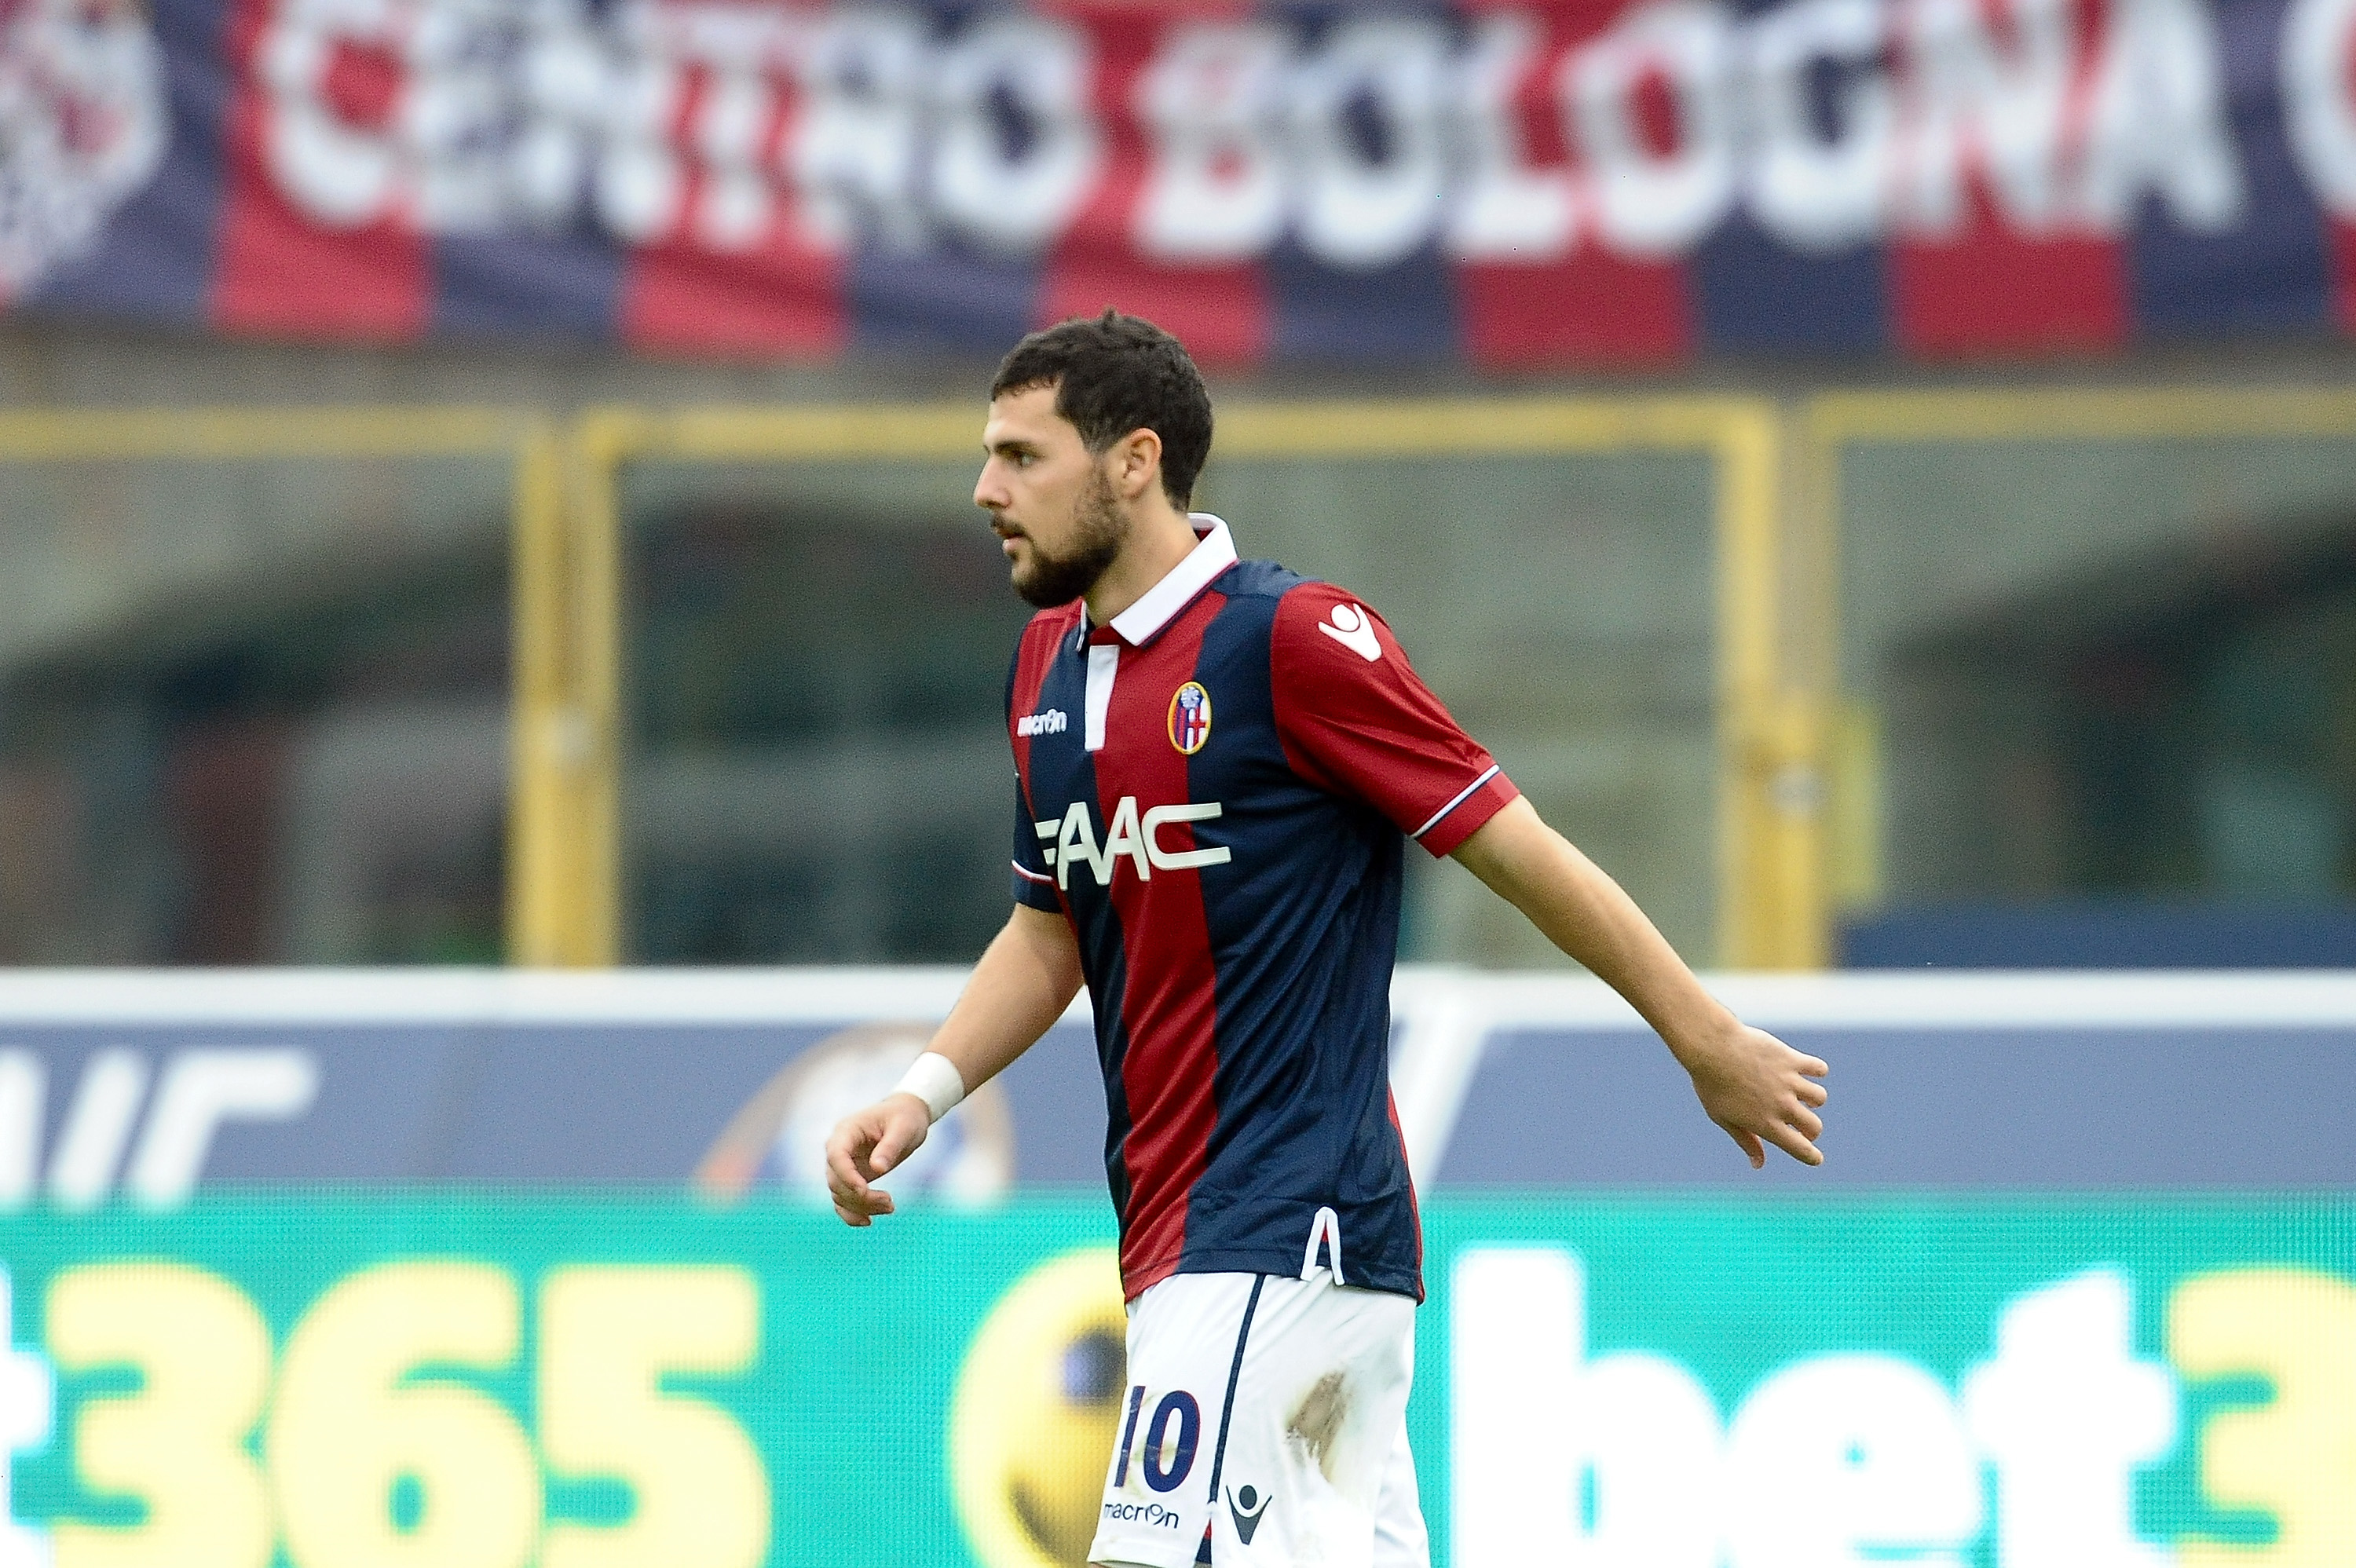 Inzaghi Hoping To Fully Recover Destro For Bologna vs Inter